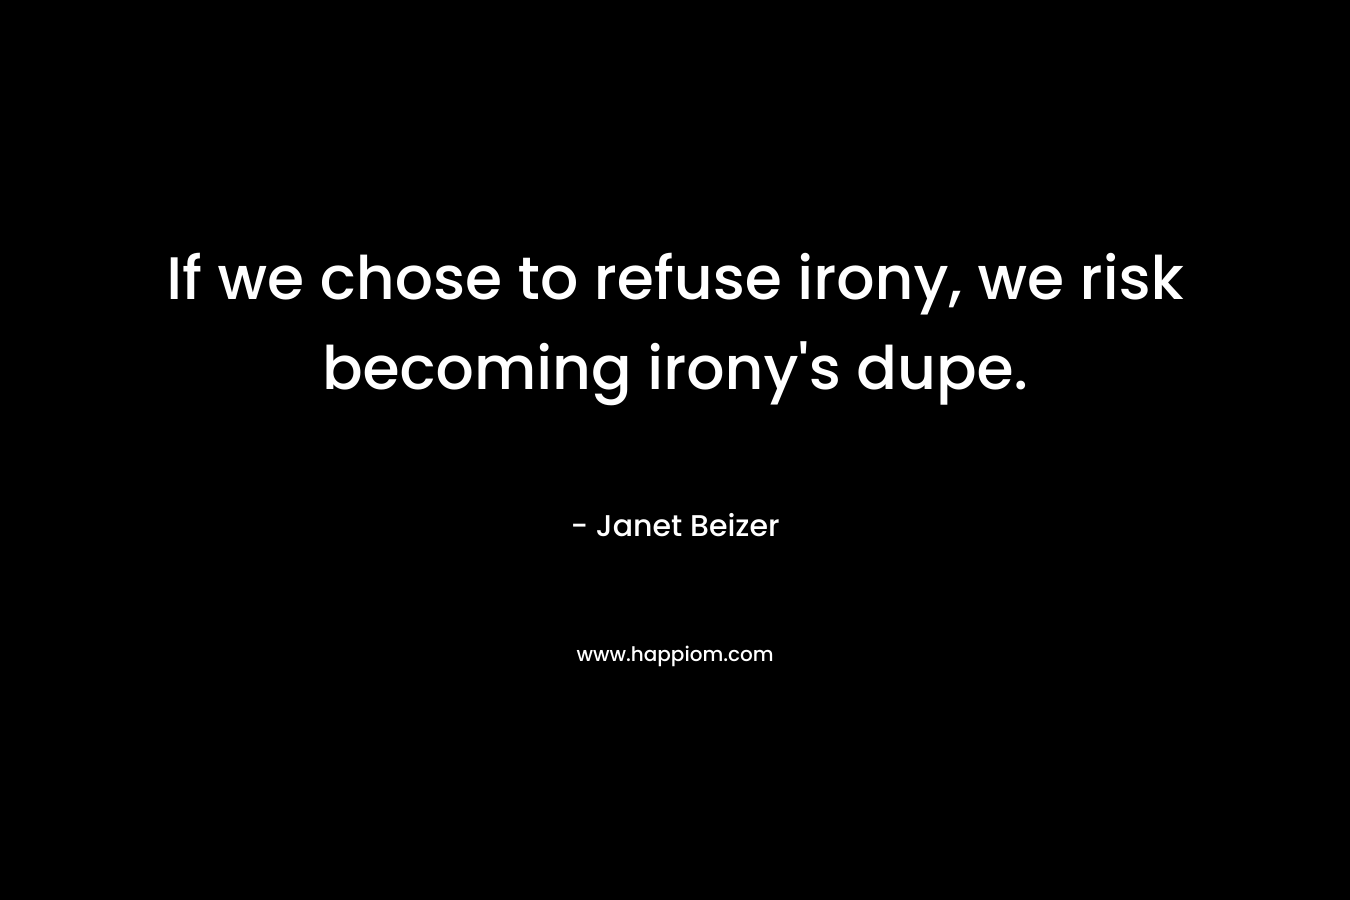 If we chose to refuse irony, we risk becoming irony’s dupe. – Janet Beizer